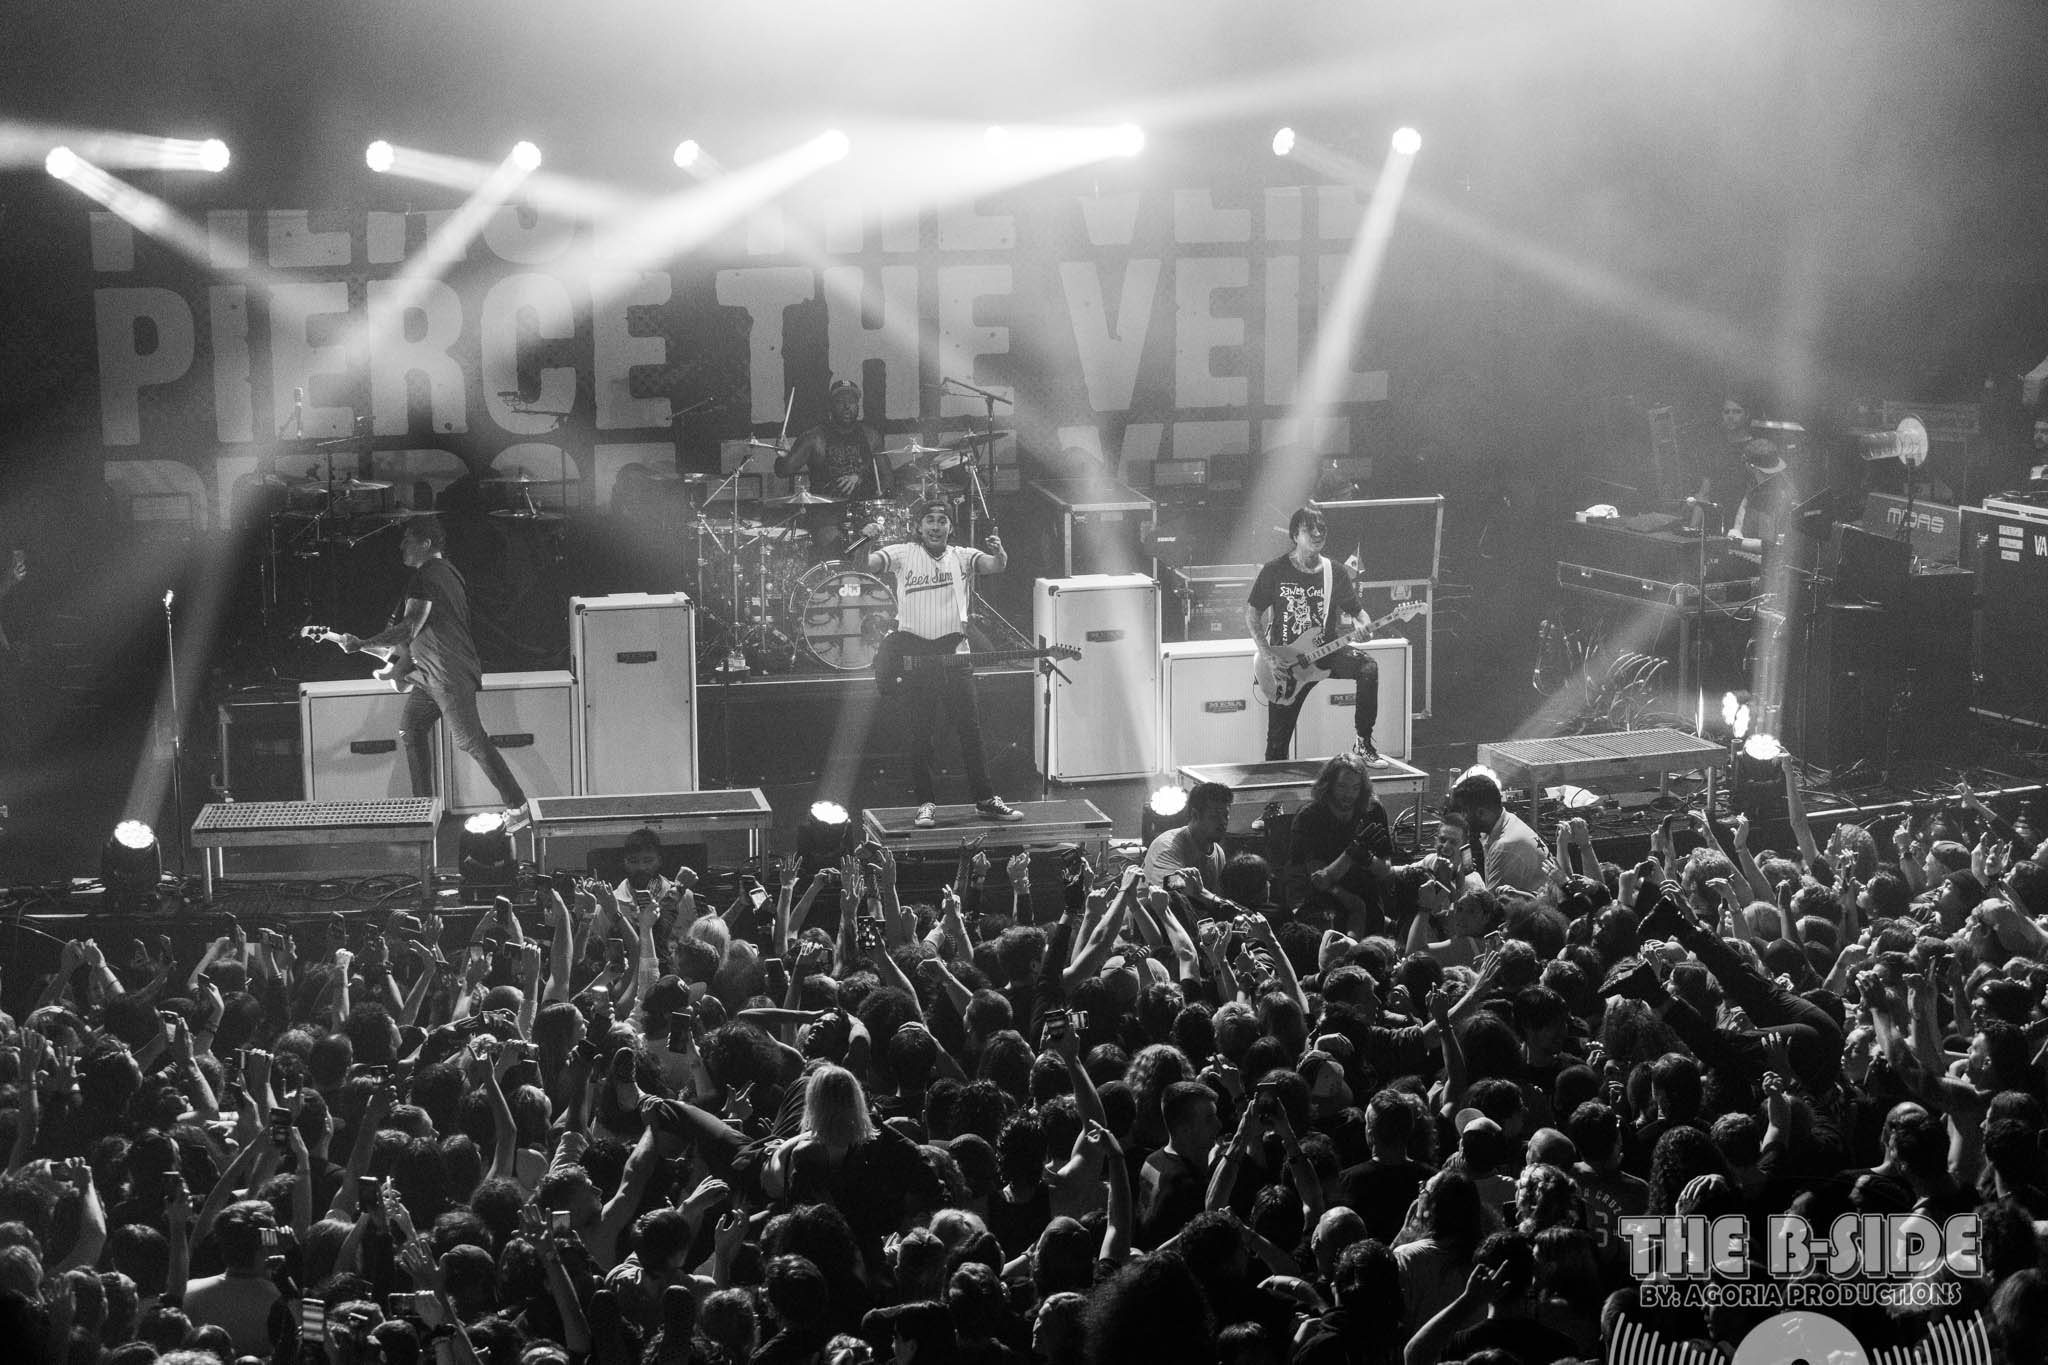 Pierce the Veil live in Toronto at Rebel. Taken By Leo Montero, Truffle Images, The B-Side Blog